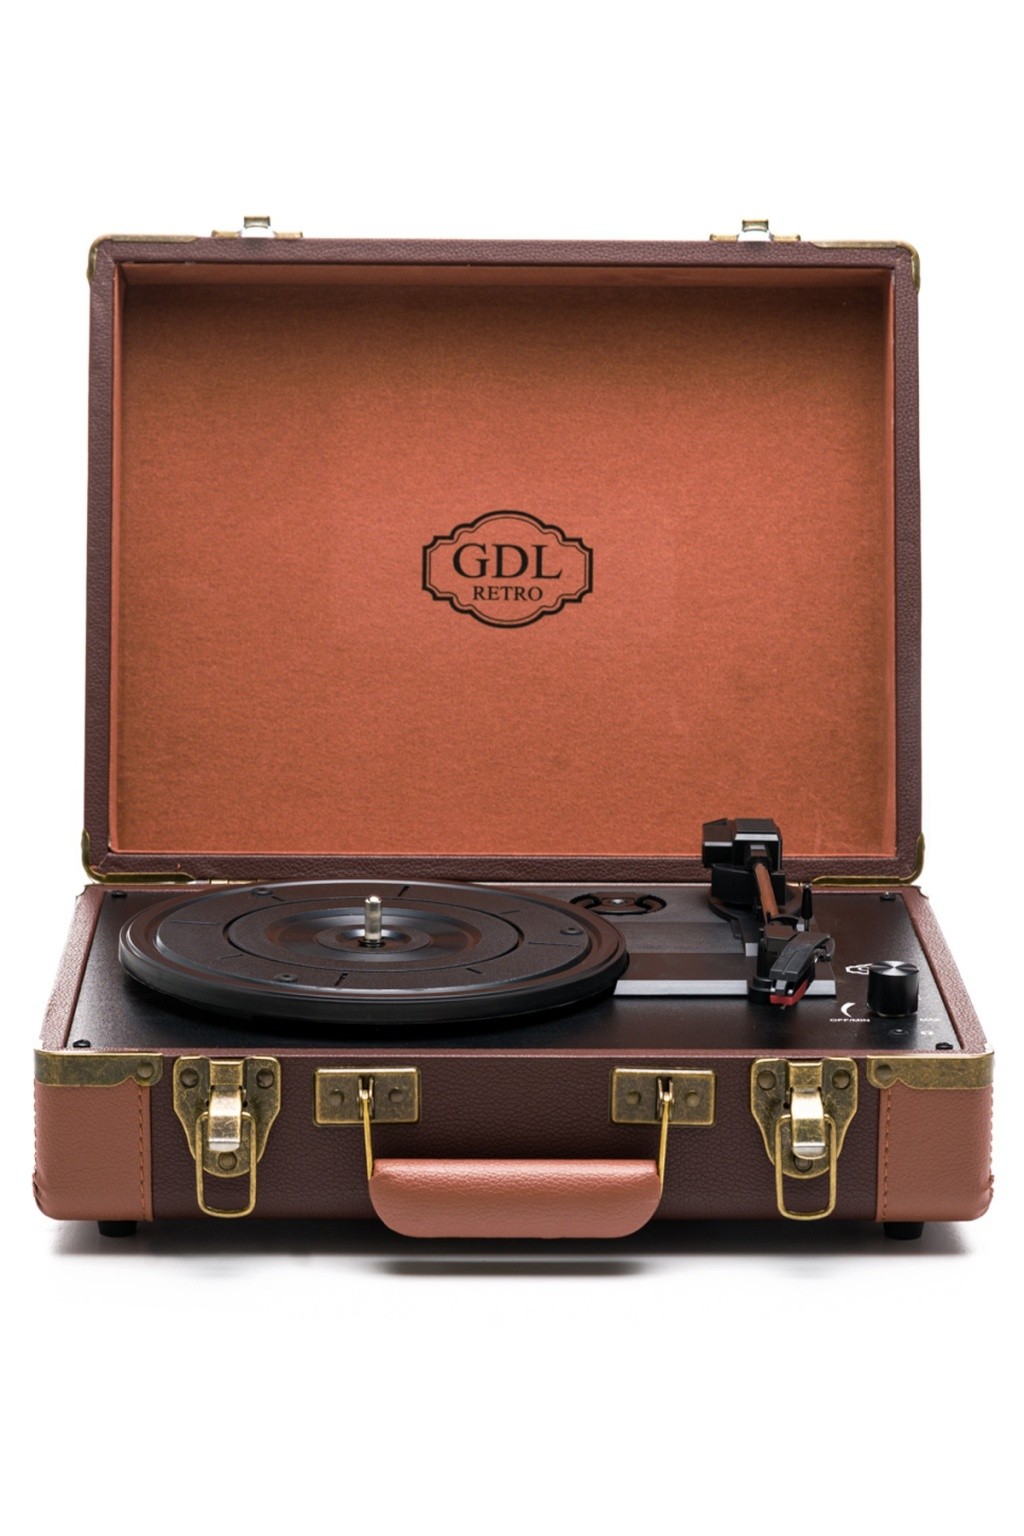 GDL Retro Bag Turntable T317b (WITH BLUETOOTH CHARGING) - Chocolate